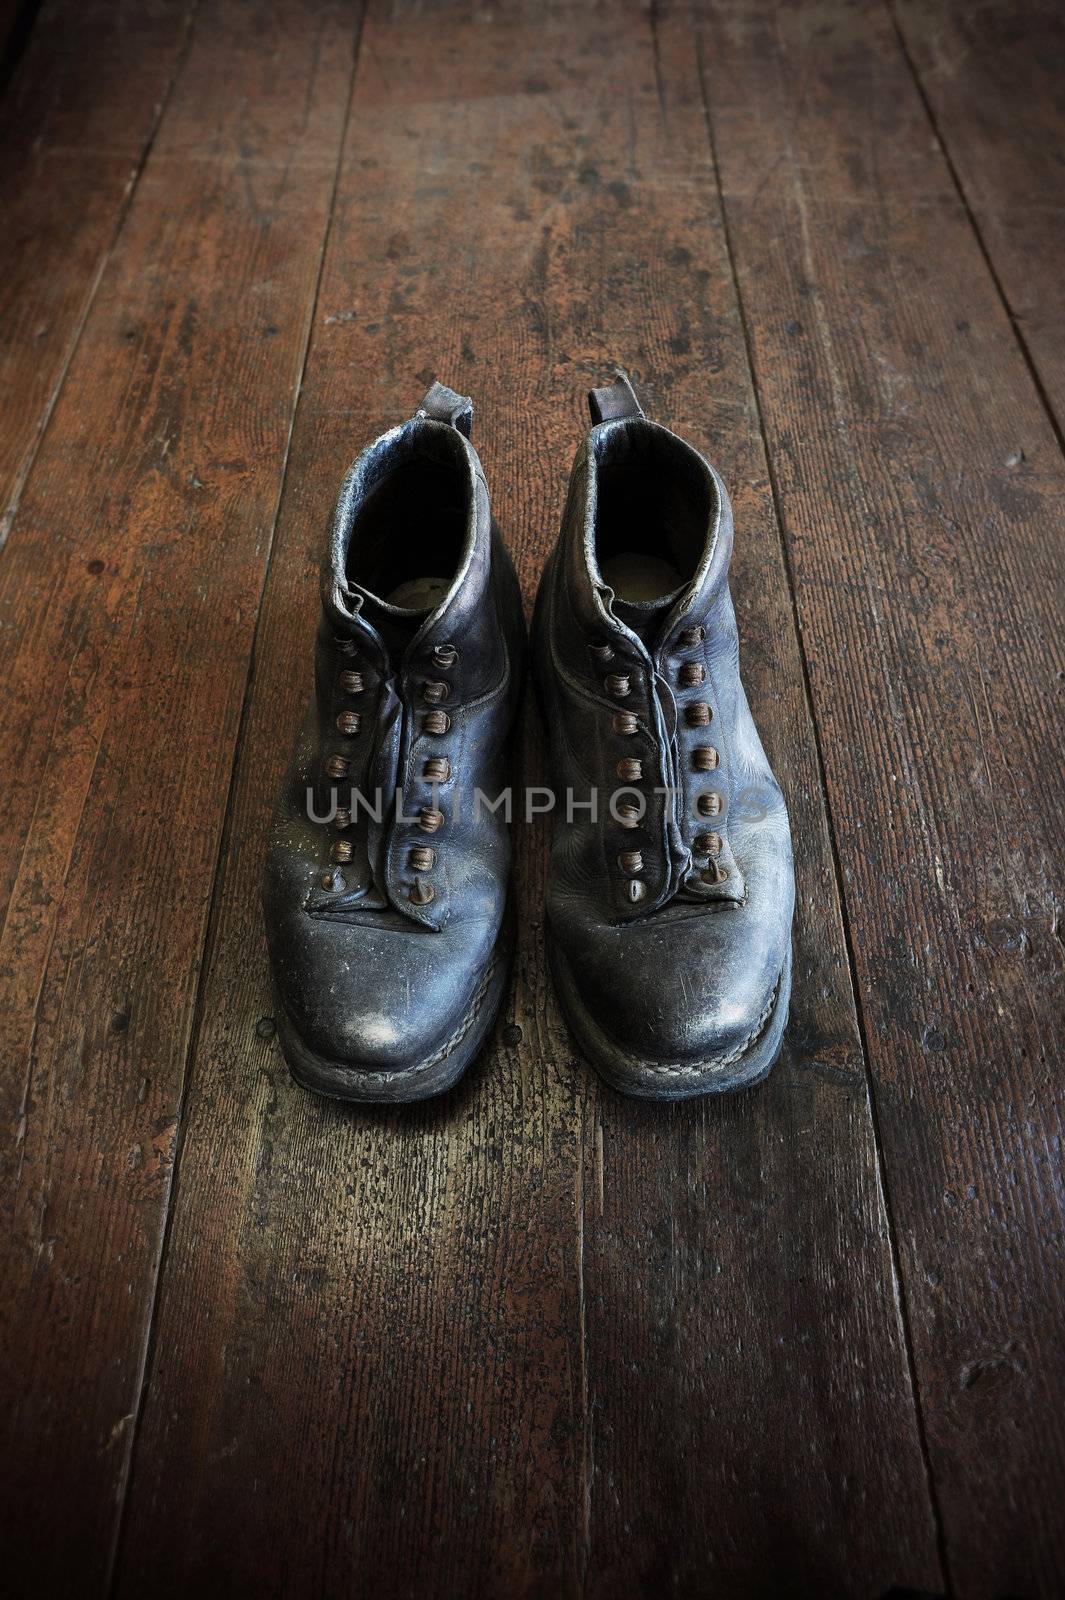 an old pair of leather boots on an old wooden floor